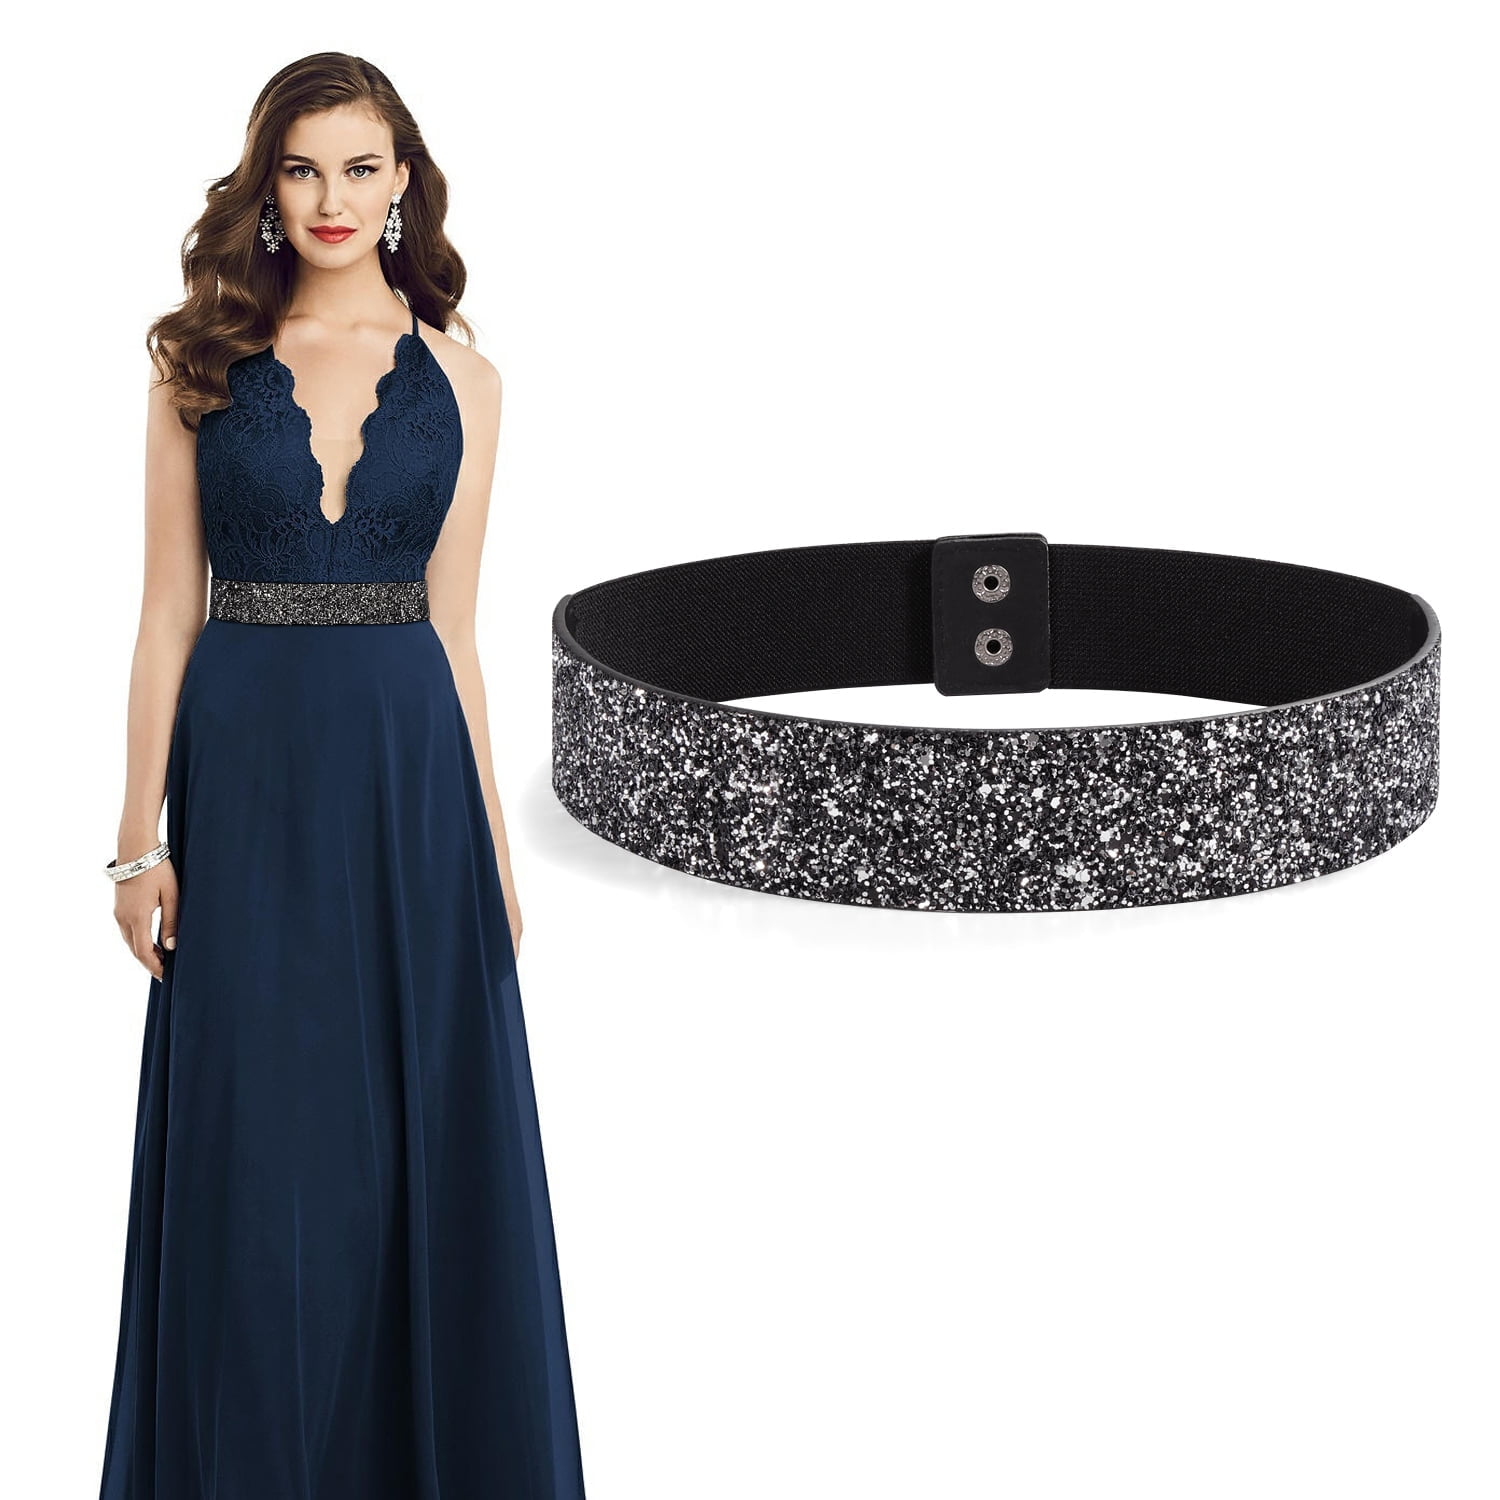 Full Coverage Evening Gown with a Sparkle Belt | Beautiful maxi dresses, Evening  gowns, Perfect dress